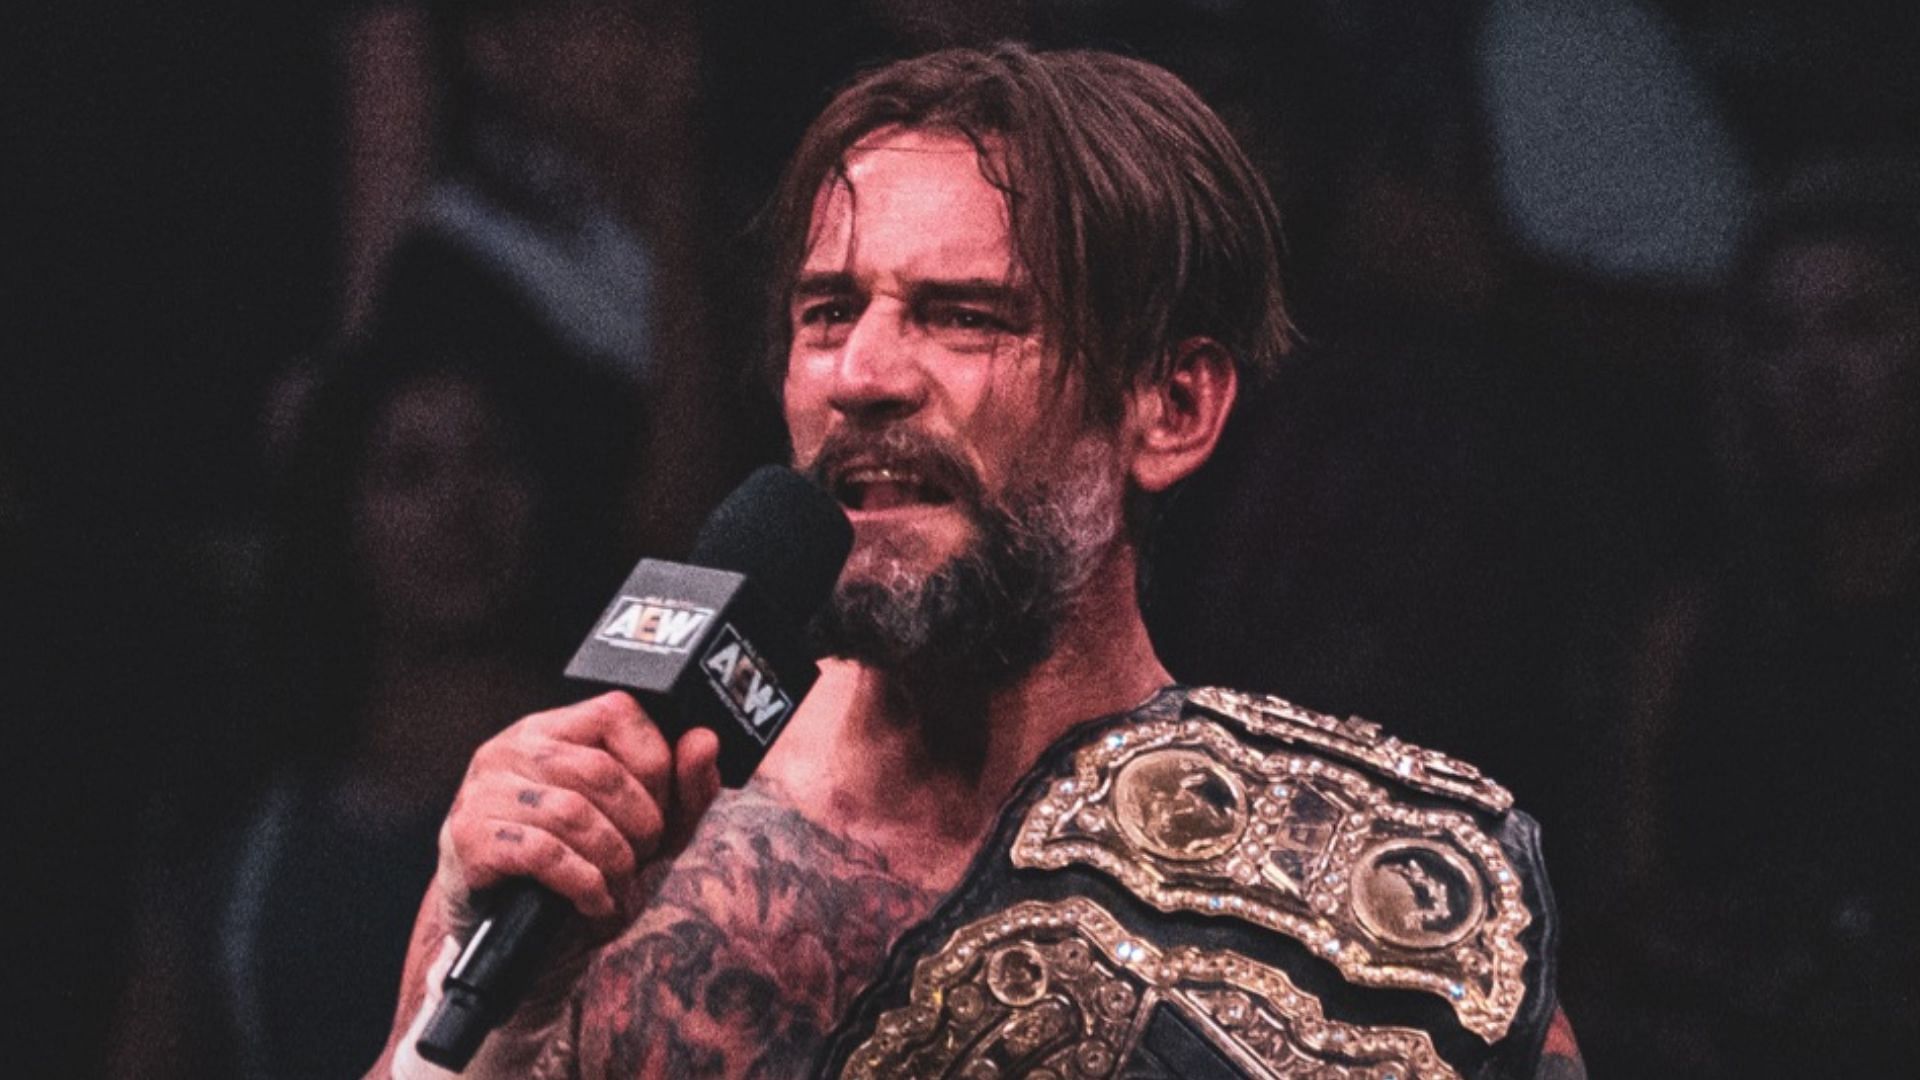 CM Punk at AEW Double or Nothing 2022